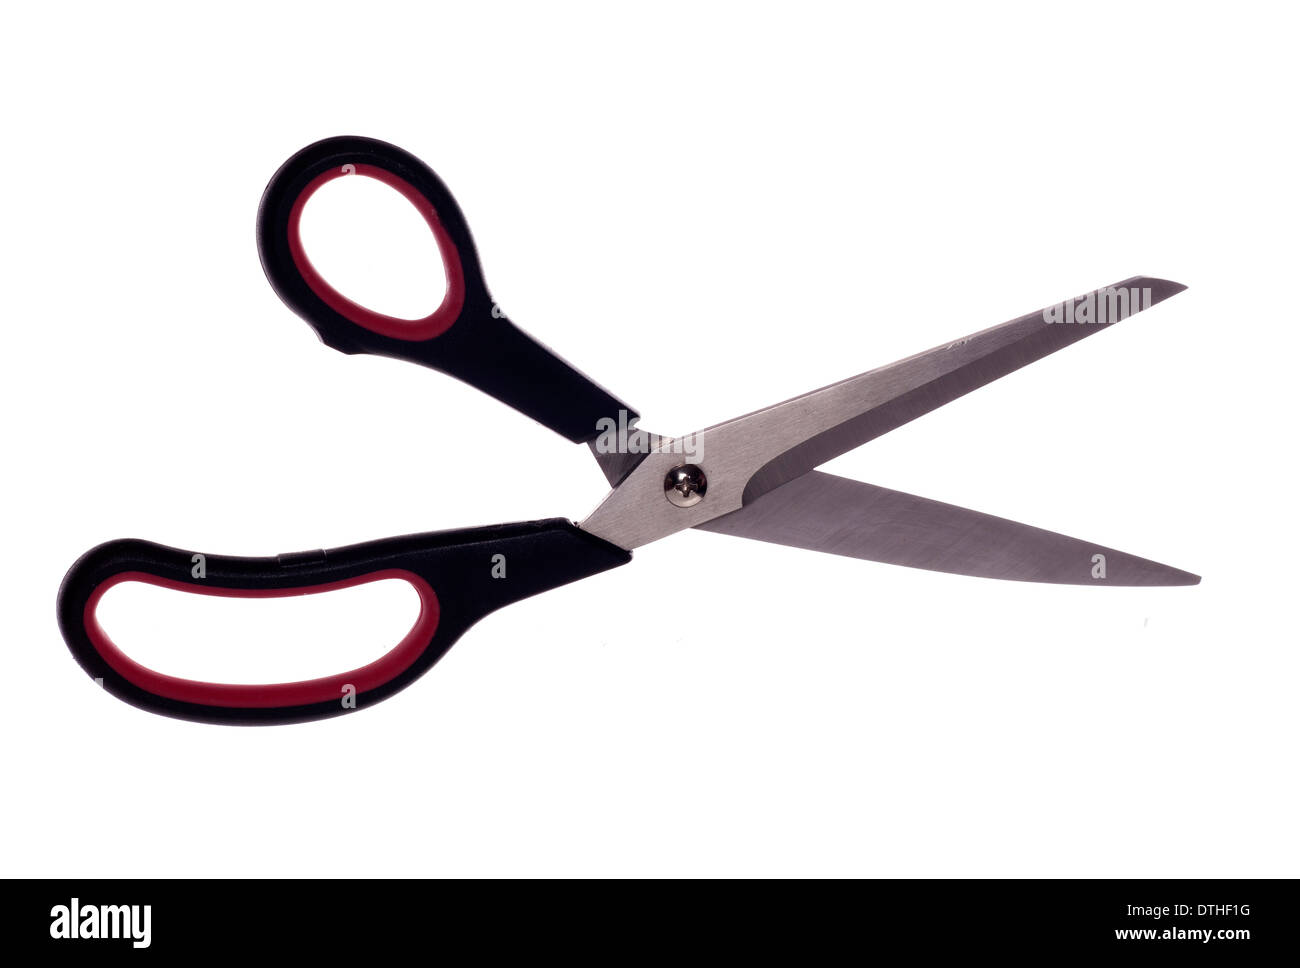 Open scissors isolated on a white background Stock Photo